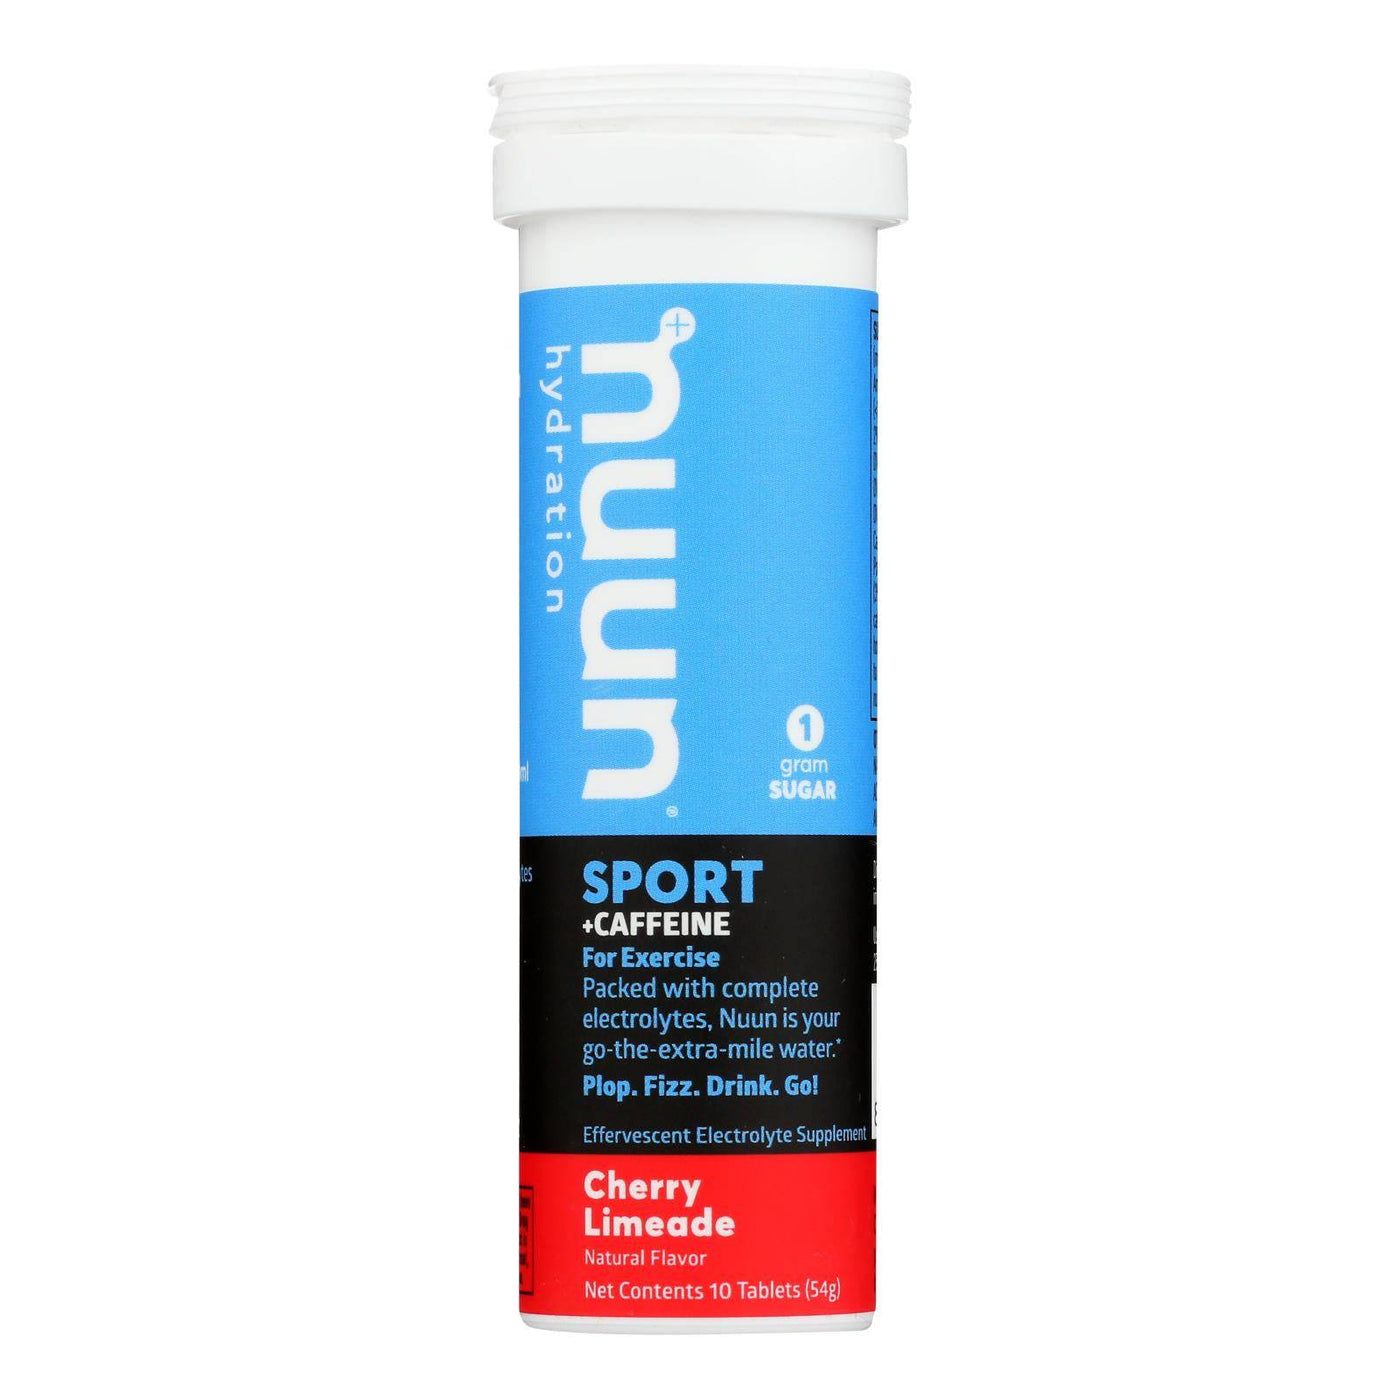 Nuun Hydration Drink Tab - Energy - Cherry Limeade - 10 Tablets - Case Of 8 | OnlyNaturals.us